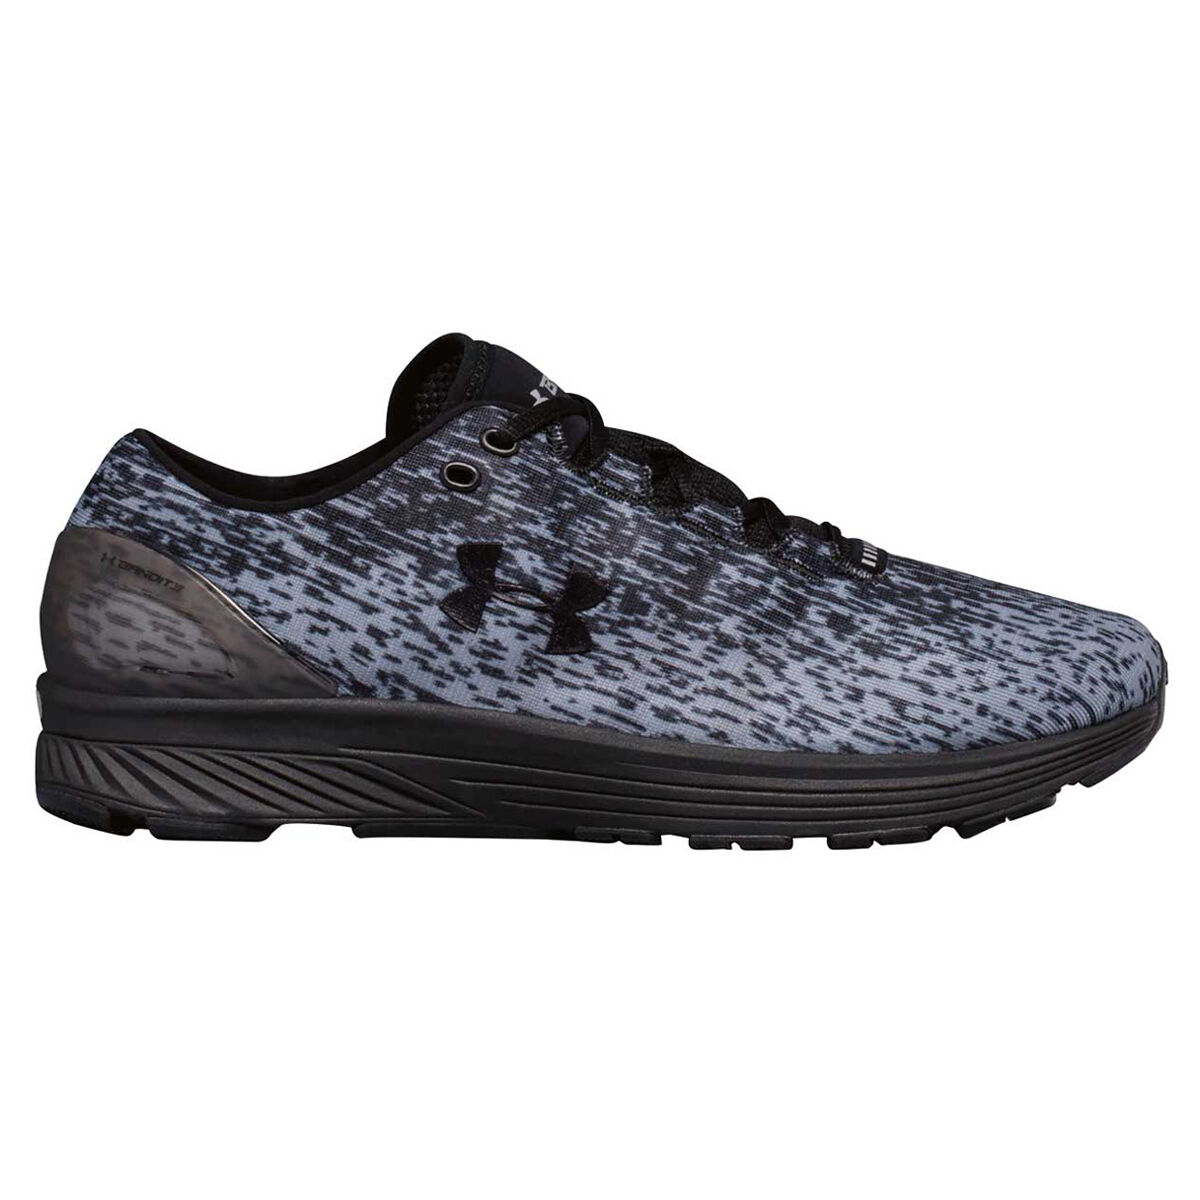 under armour charged bandit 3 mens running shoes